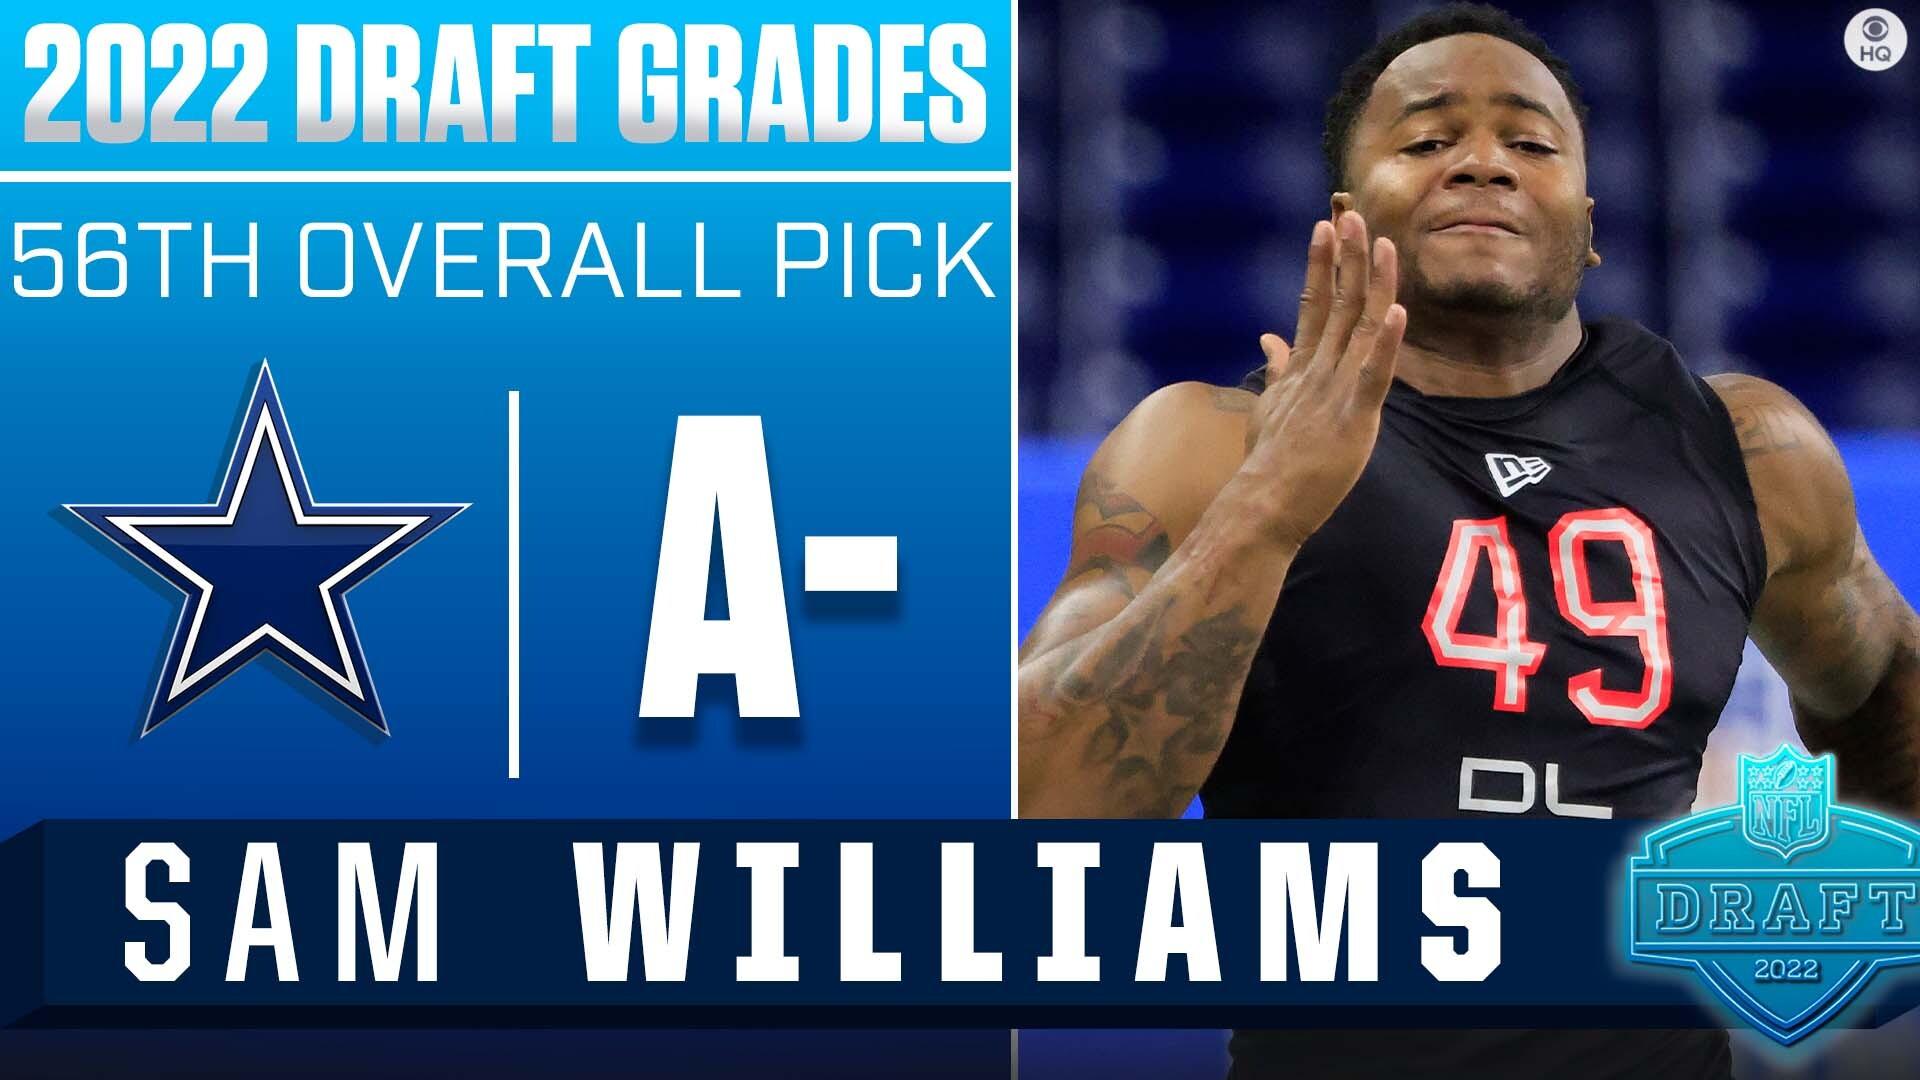 The Dallas Cowboys have selected Ole Miss EDGE Sam Williams with the 56th  overall pick in the 2022 NFL Draft.